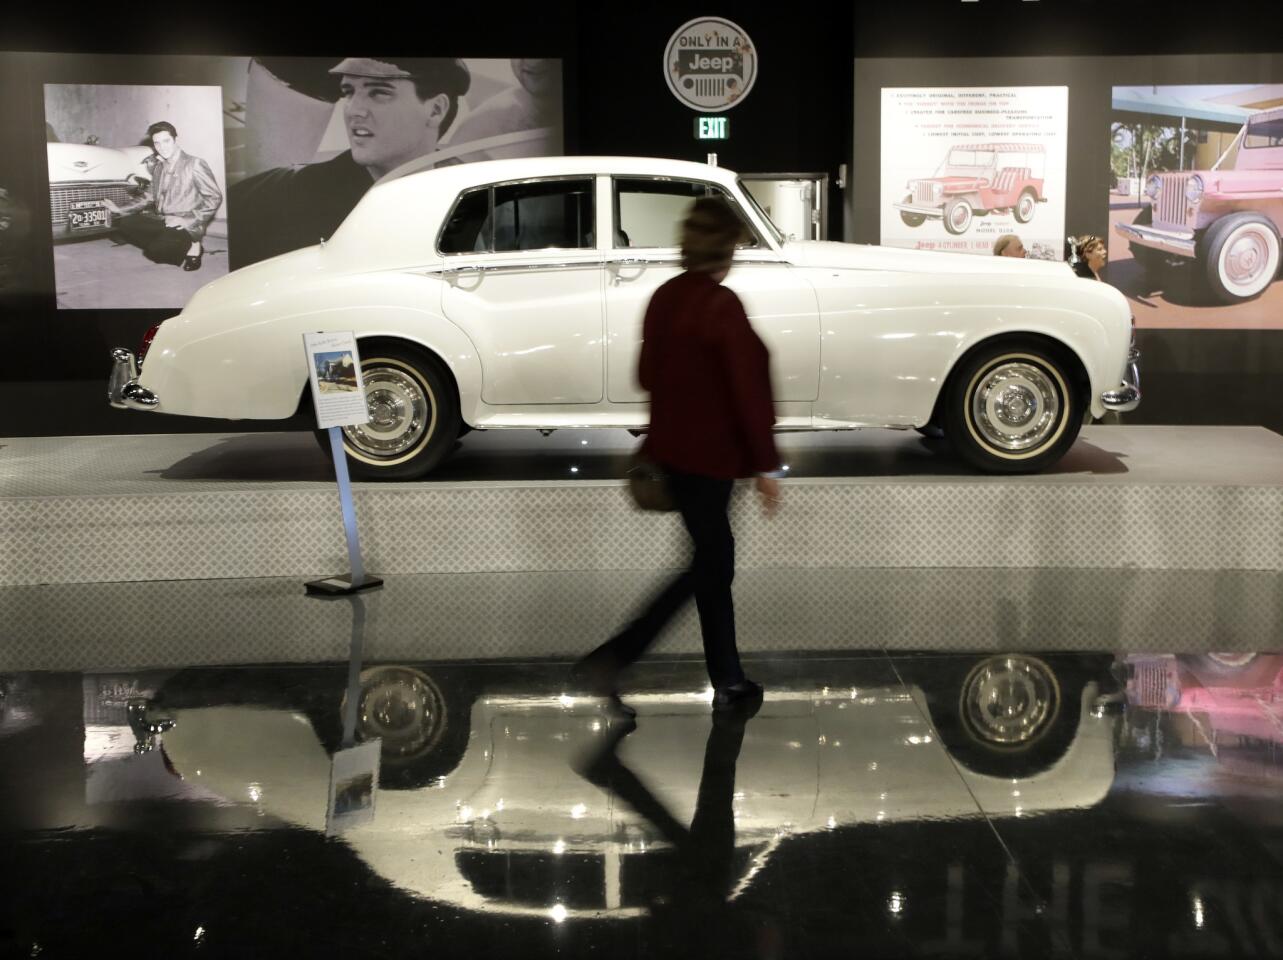 A woman walks past one of Elvis Presley's cars displayed at the "Elvis Presley's Memphis" complex